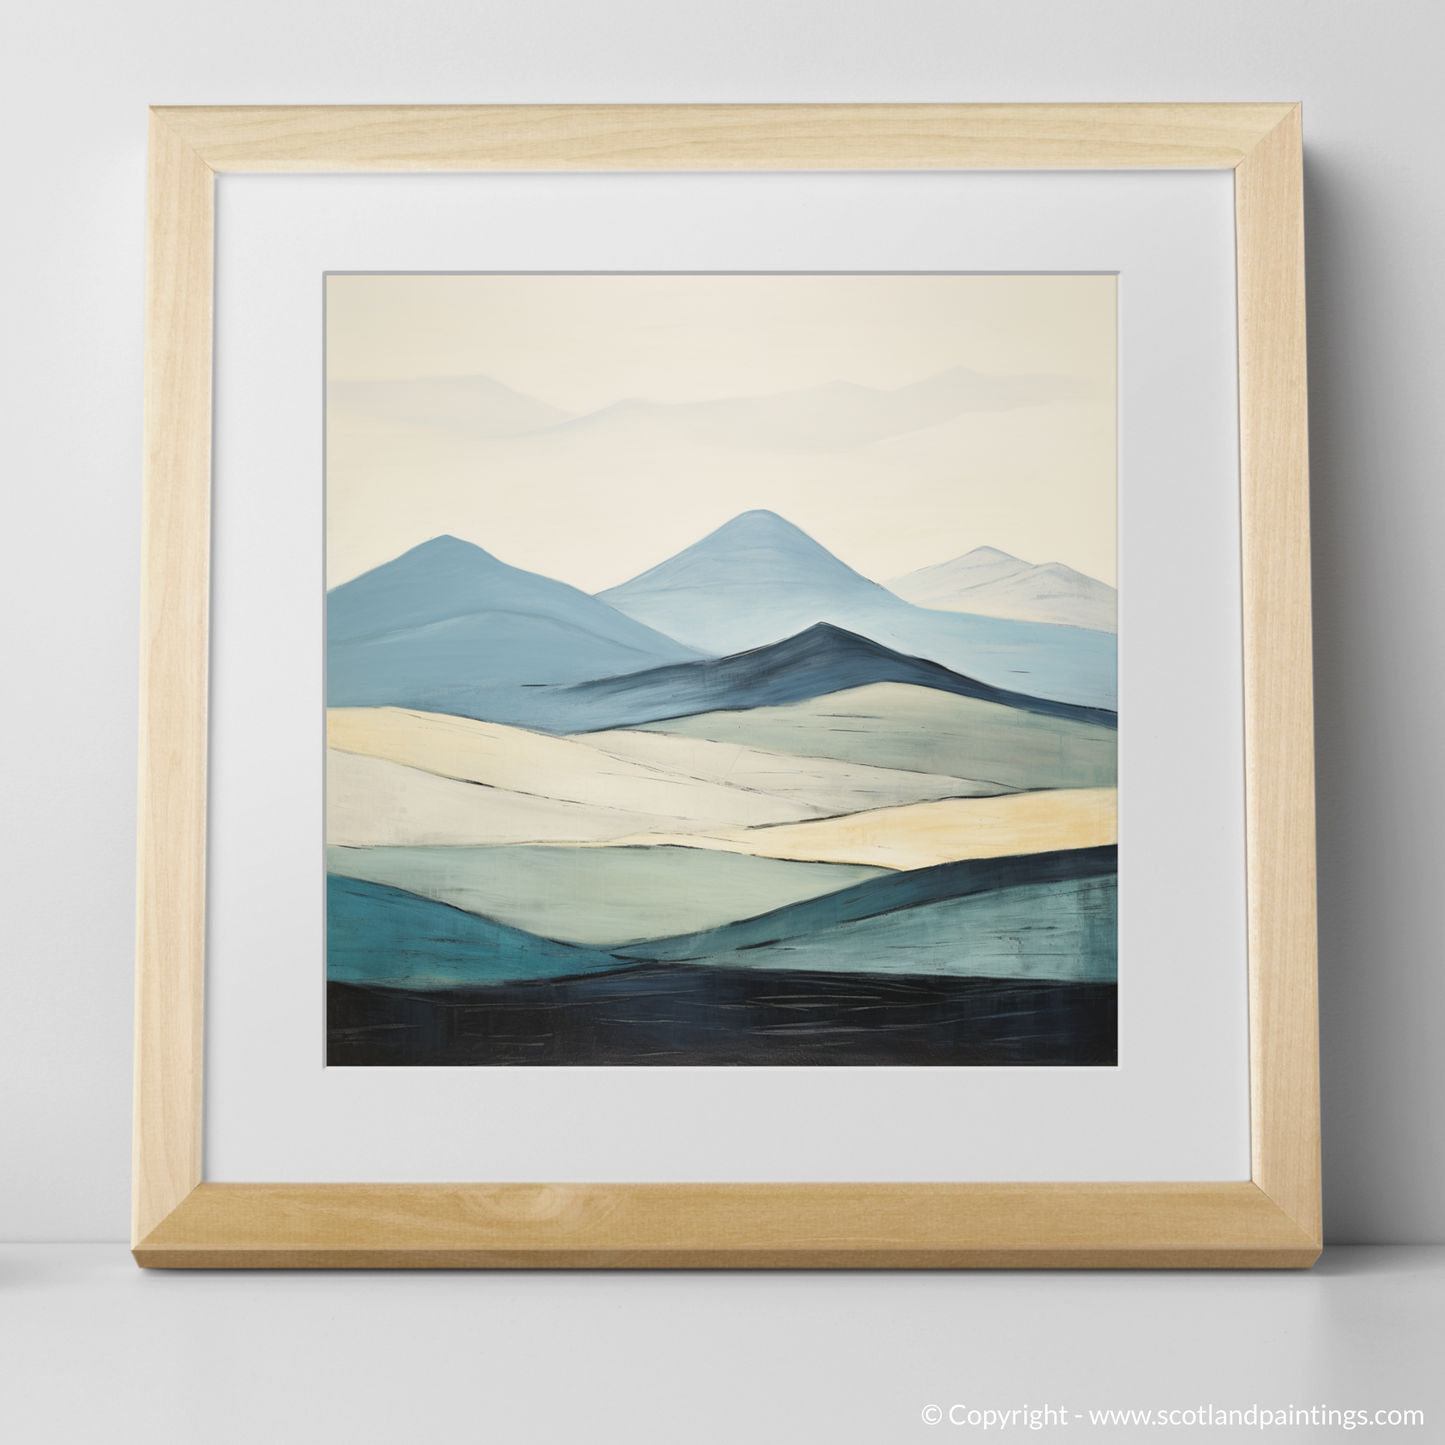 Art Print of Meall Corranaich with a natural frame